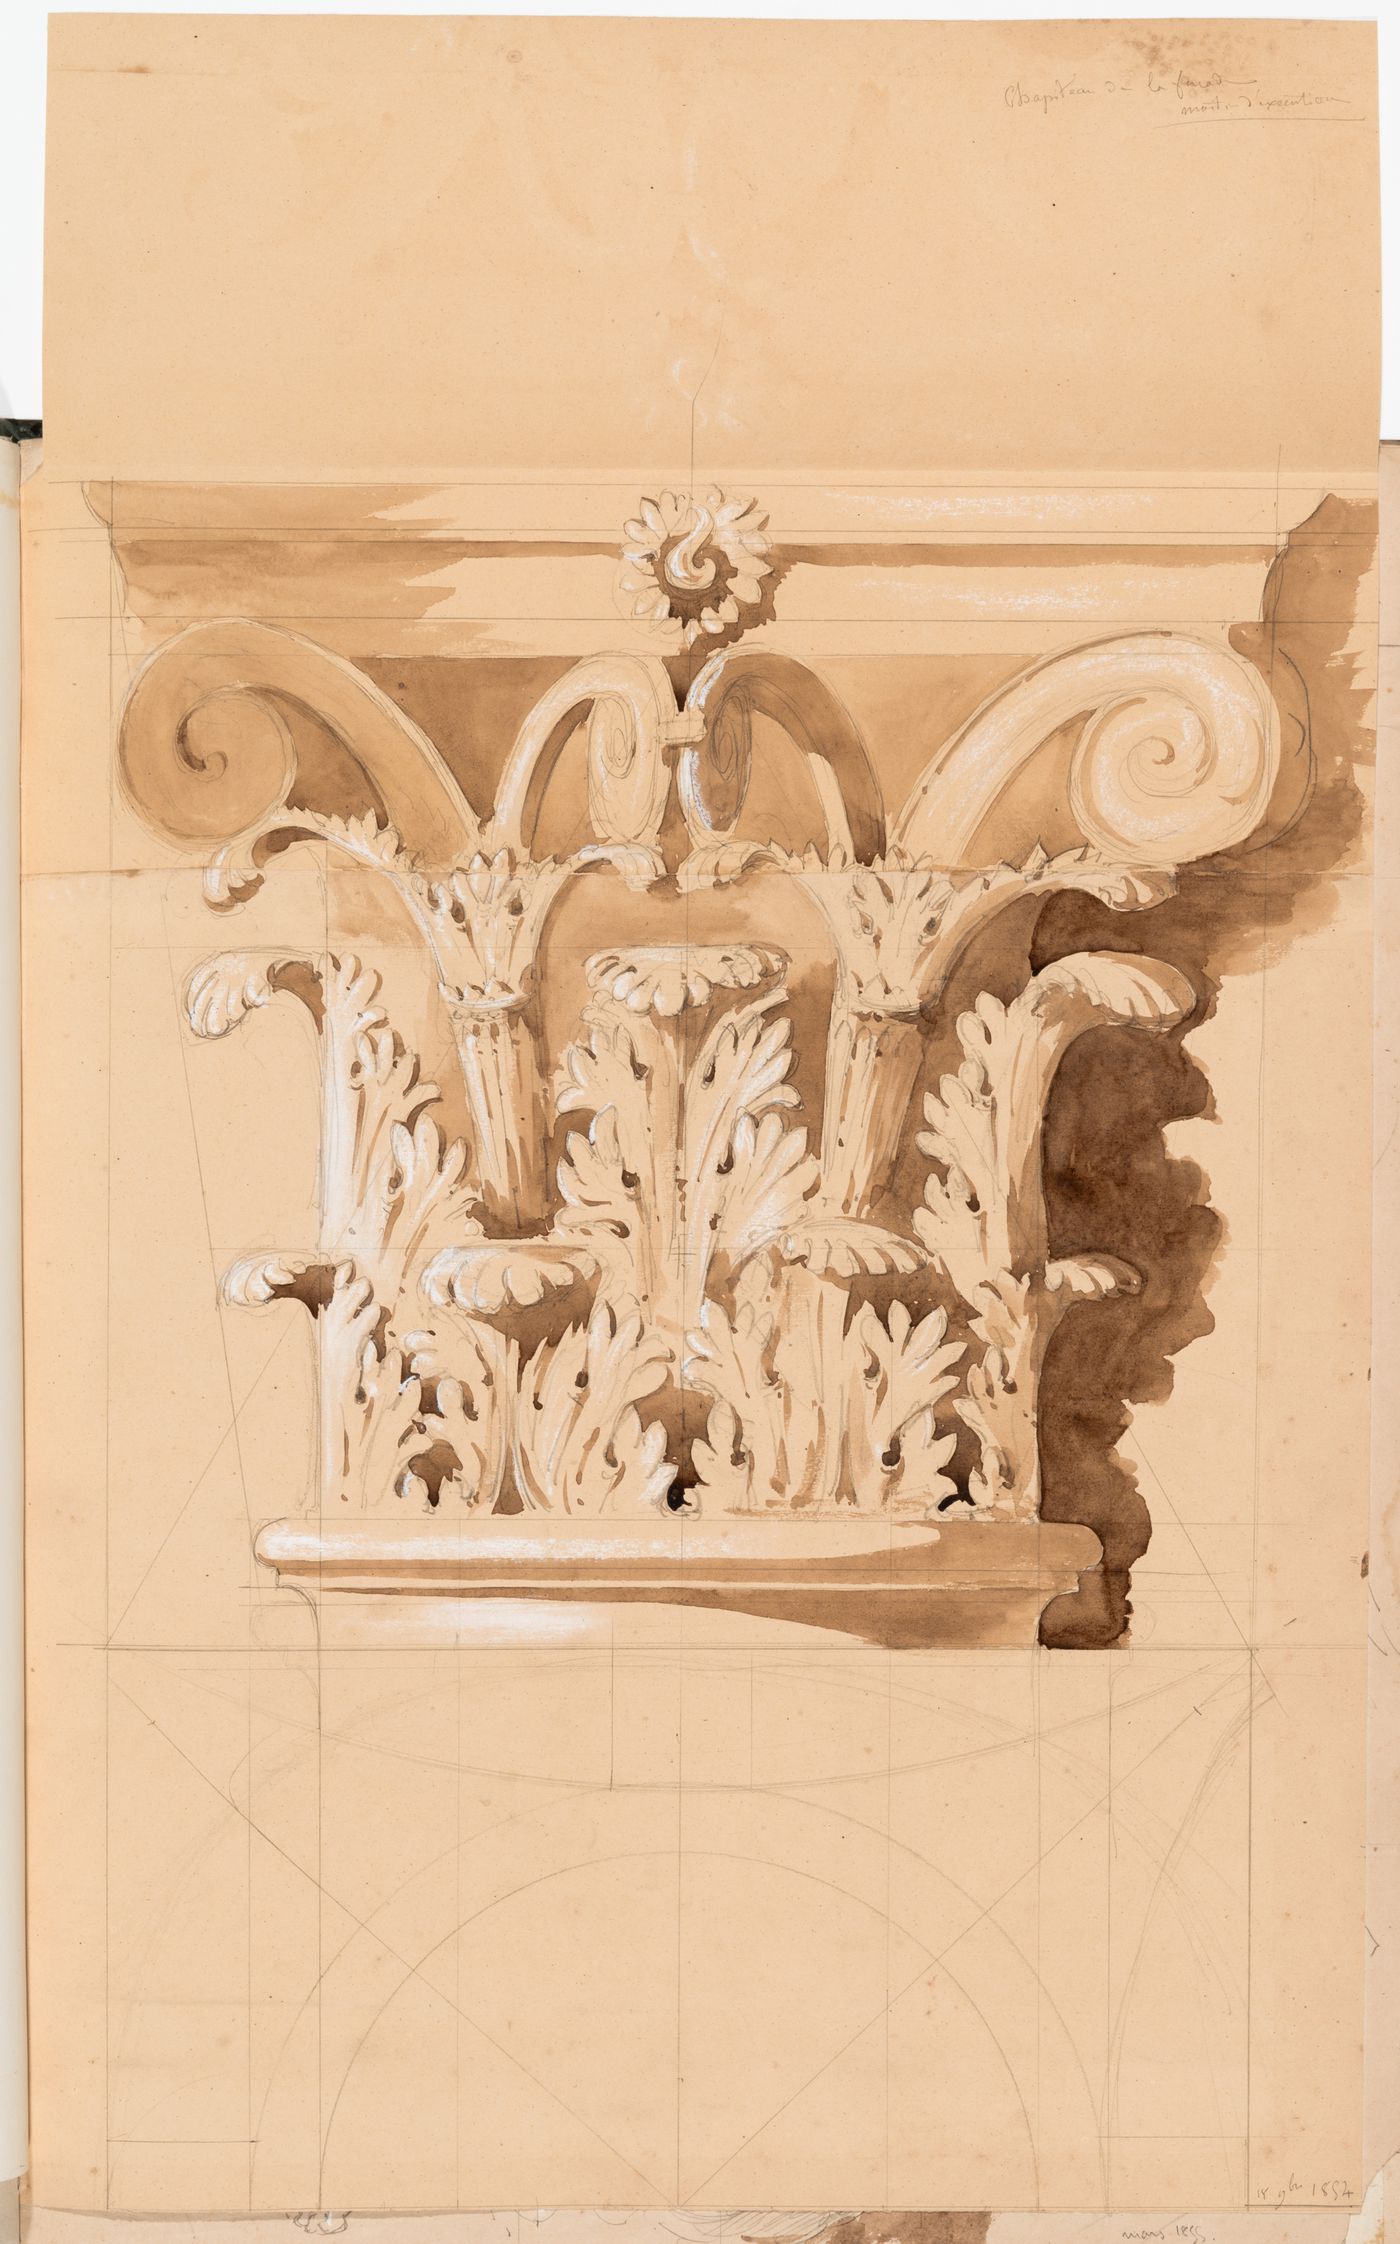 Elevation and partial plan of a Corinthian capital